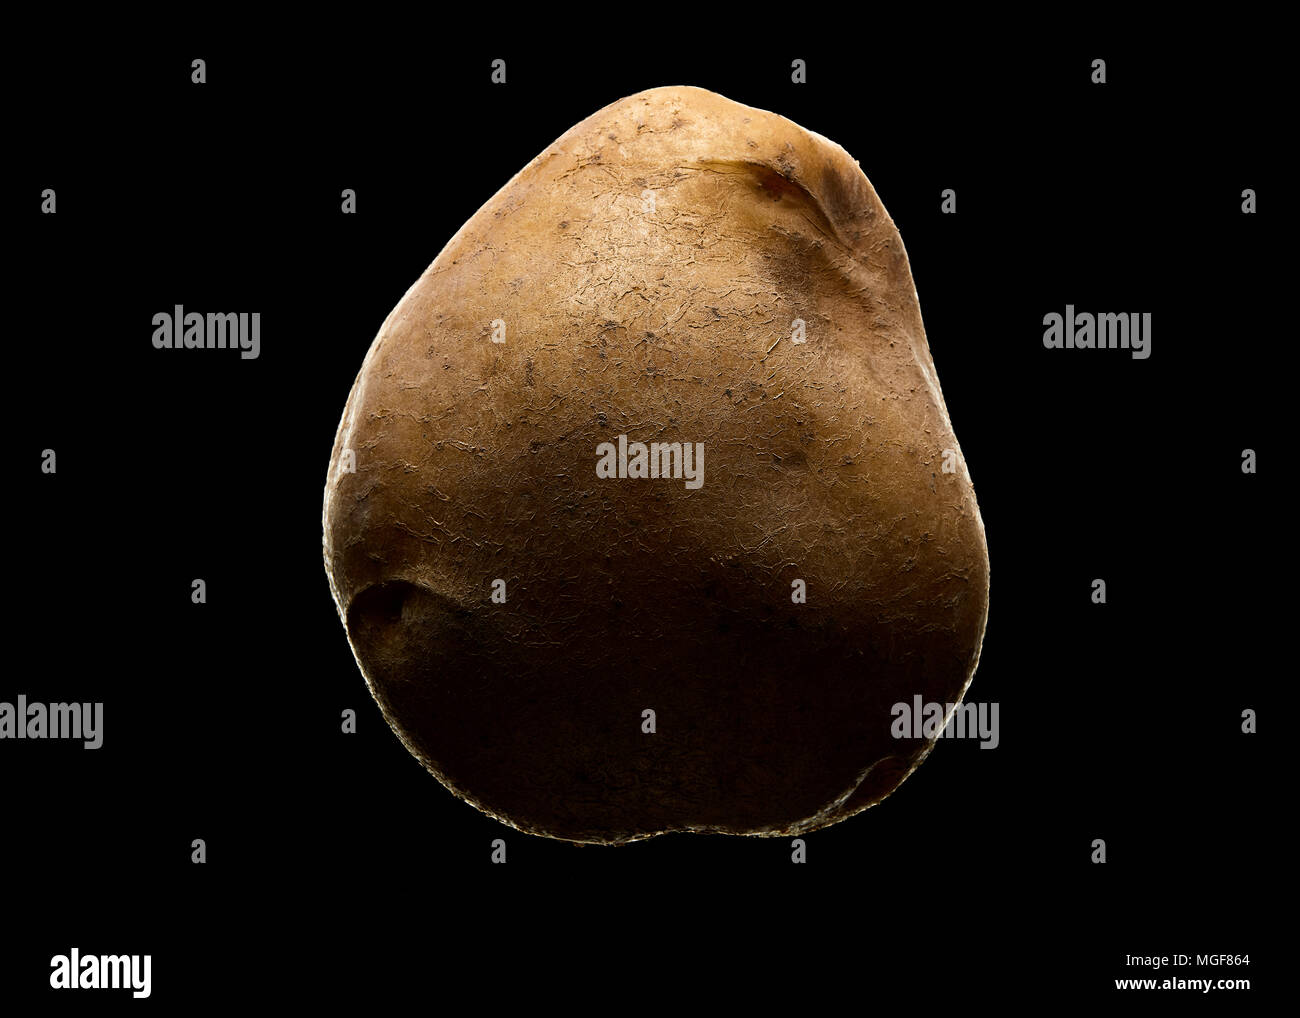 close-up shot of a textured potato on isolated black background with moody lighting Stock Photo